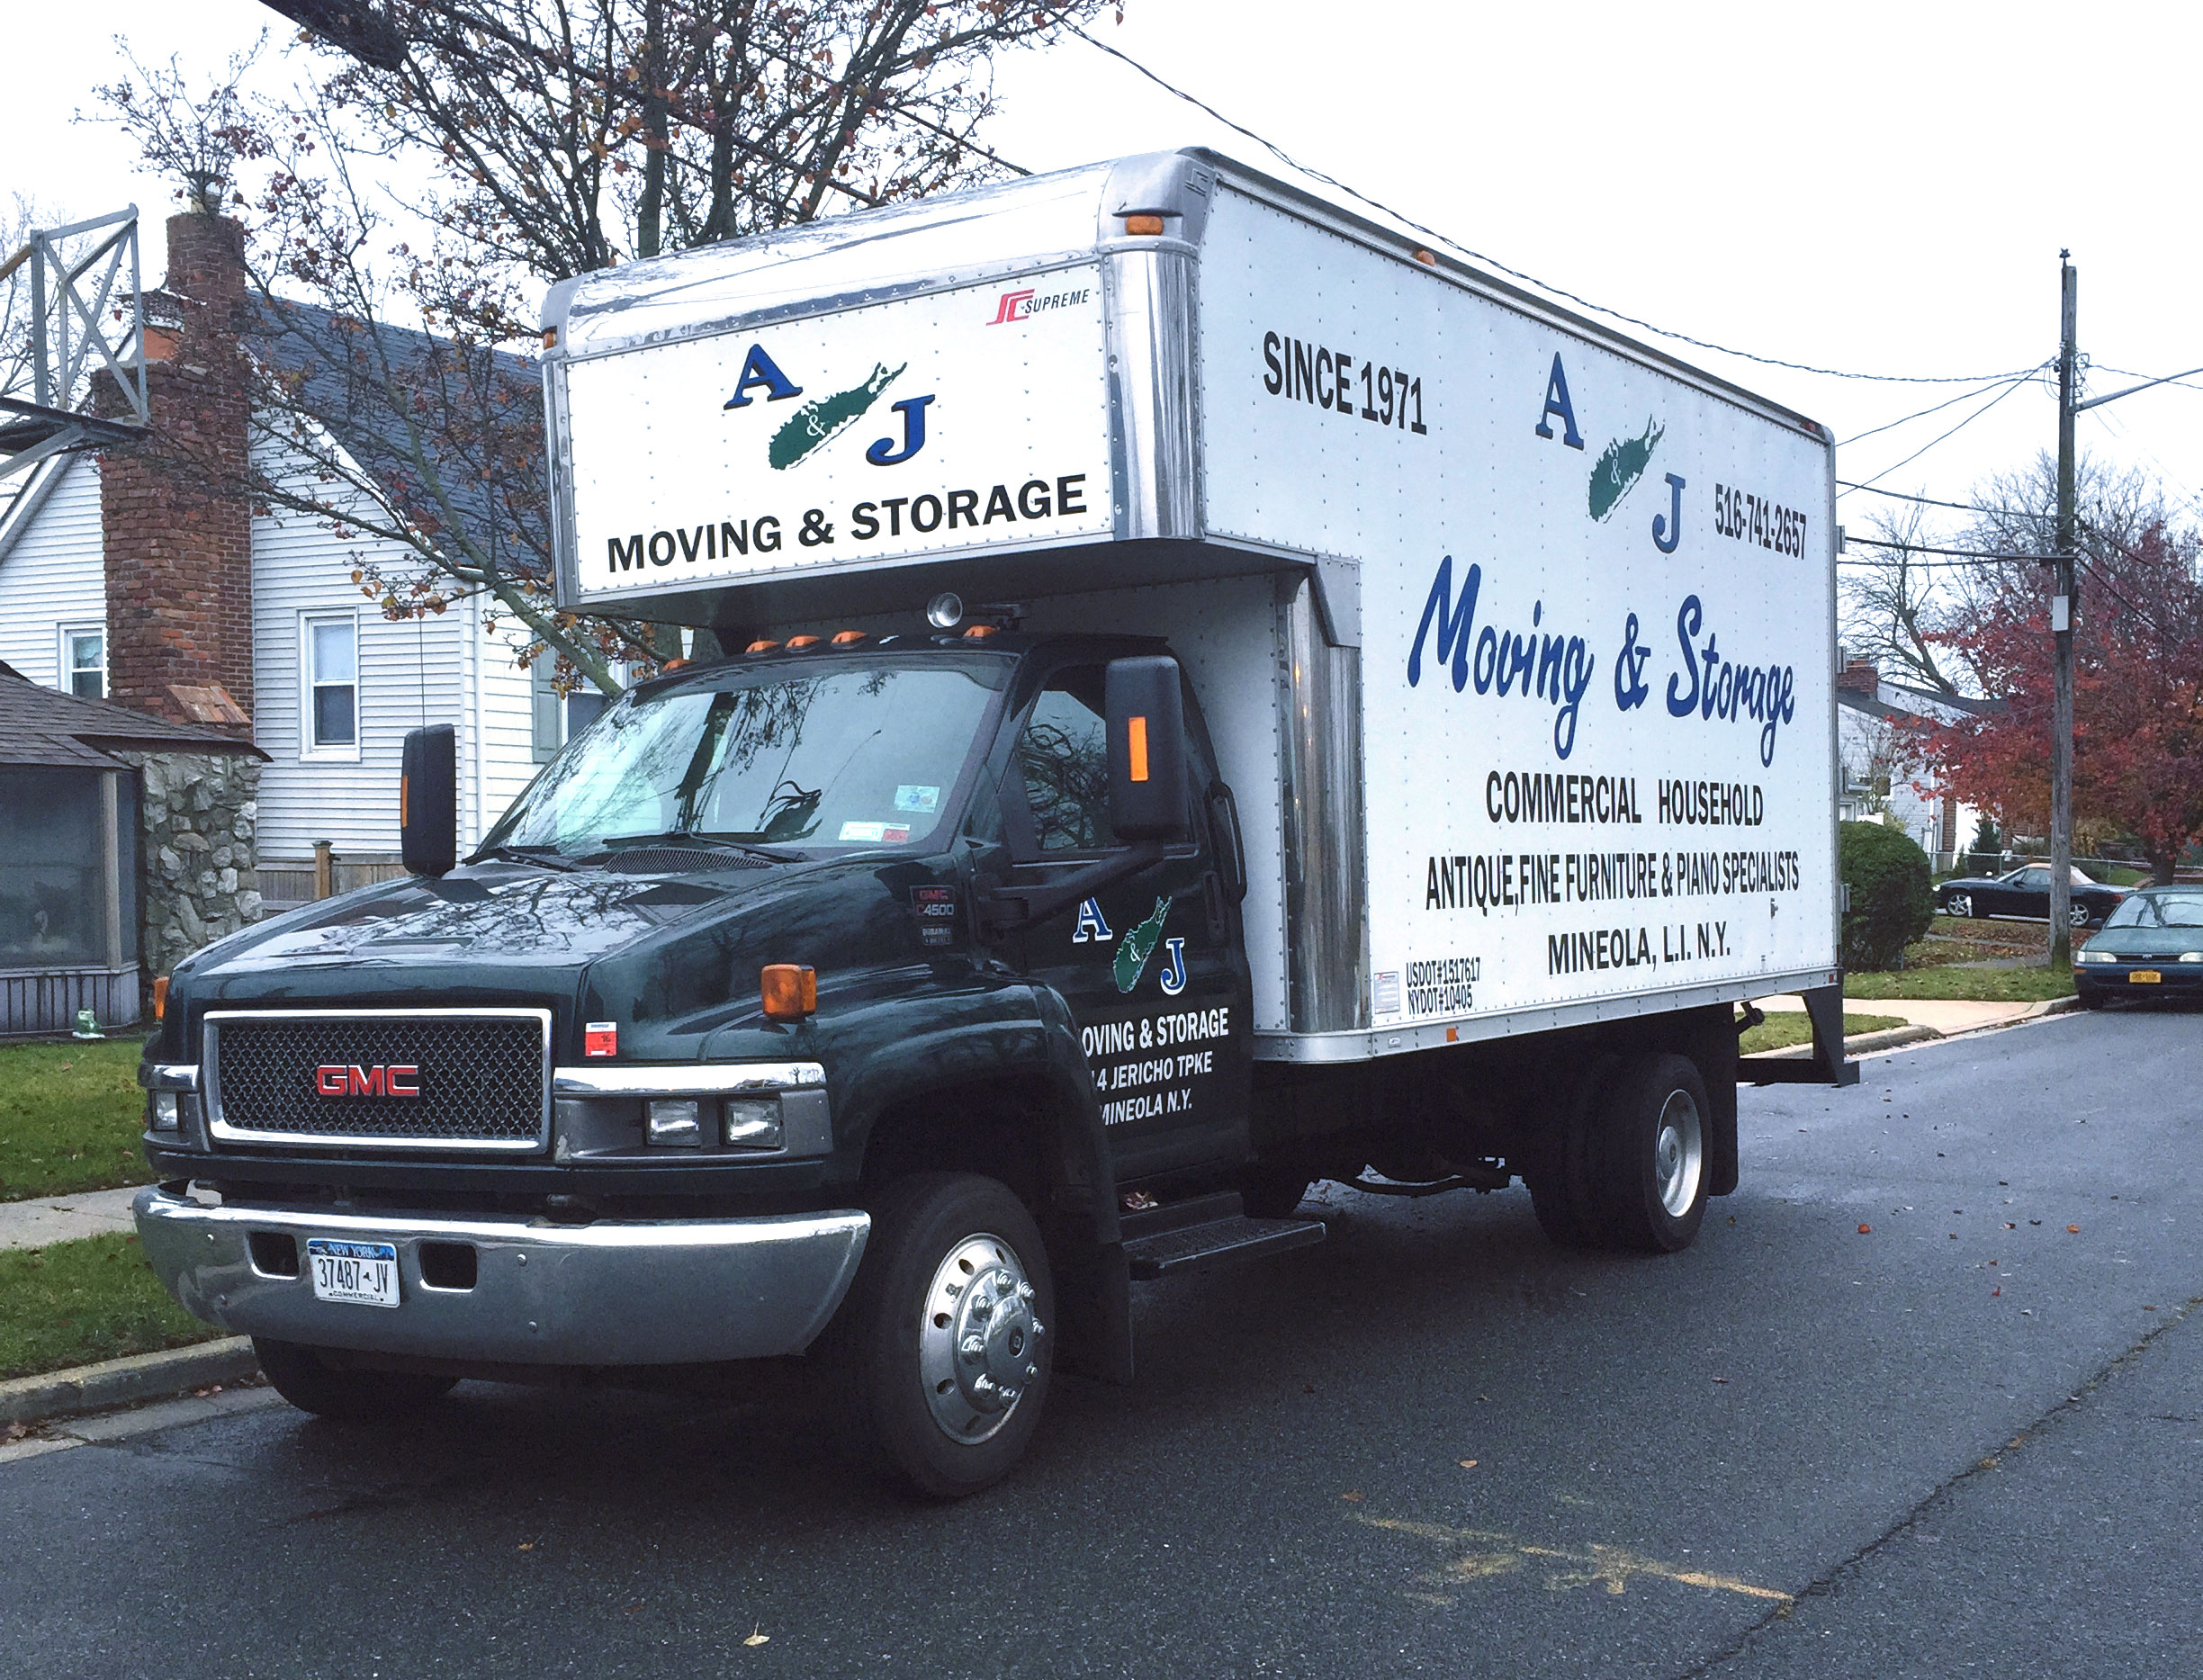 One of our moving trucks at A & J Moving and Storage Inc.